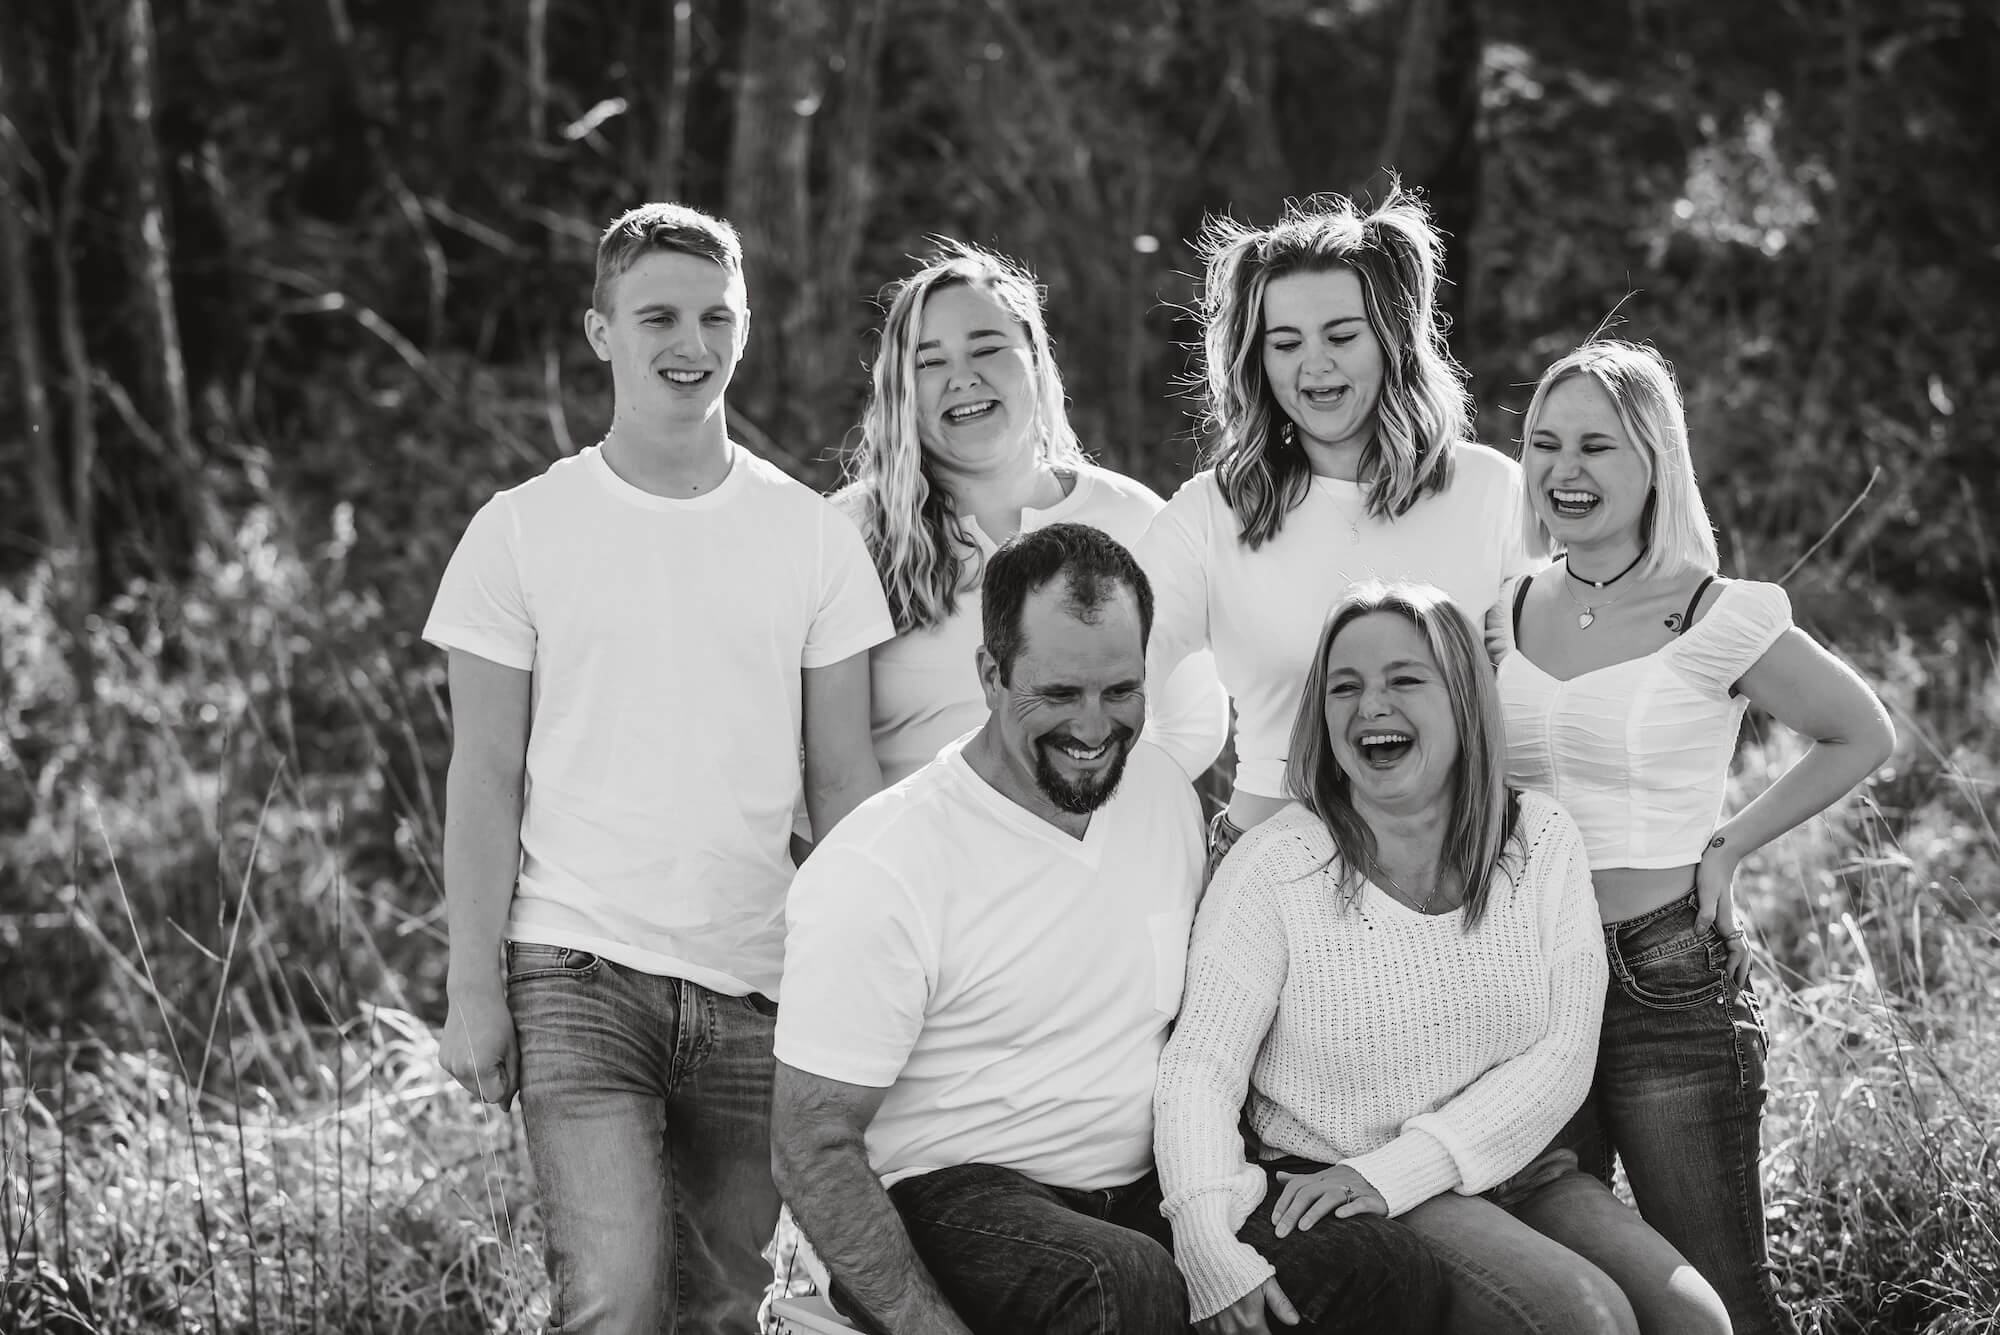 des moines family portraits, family photography near me, professional family photos